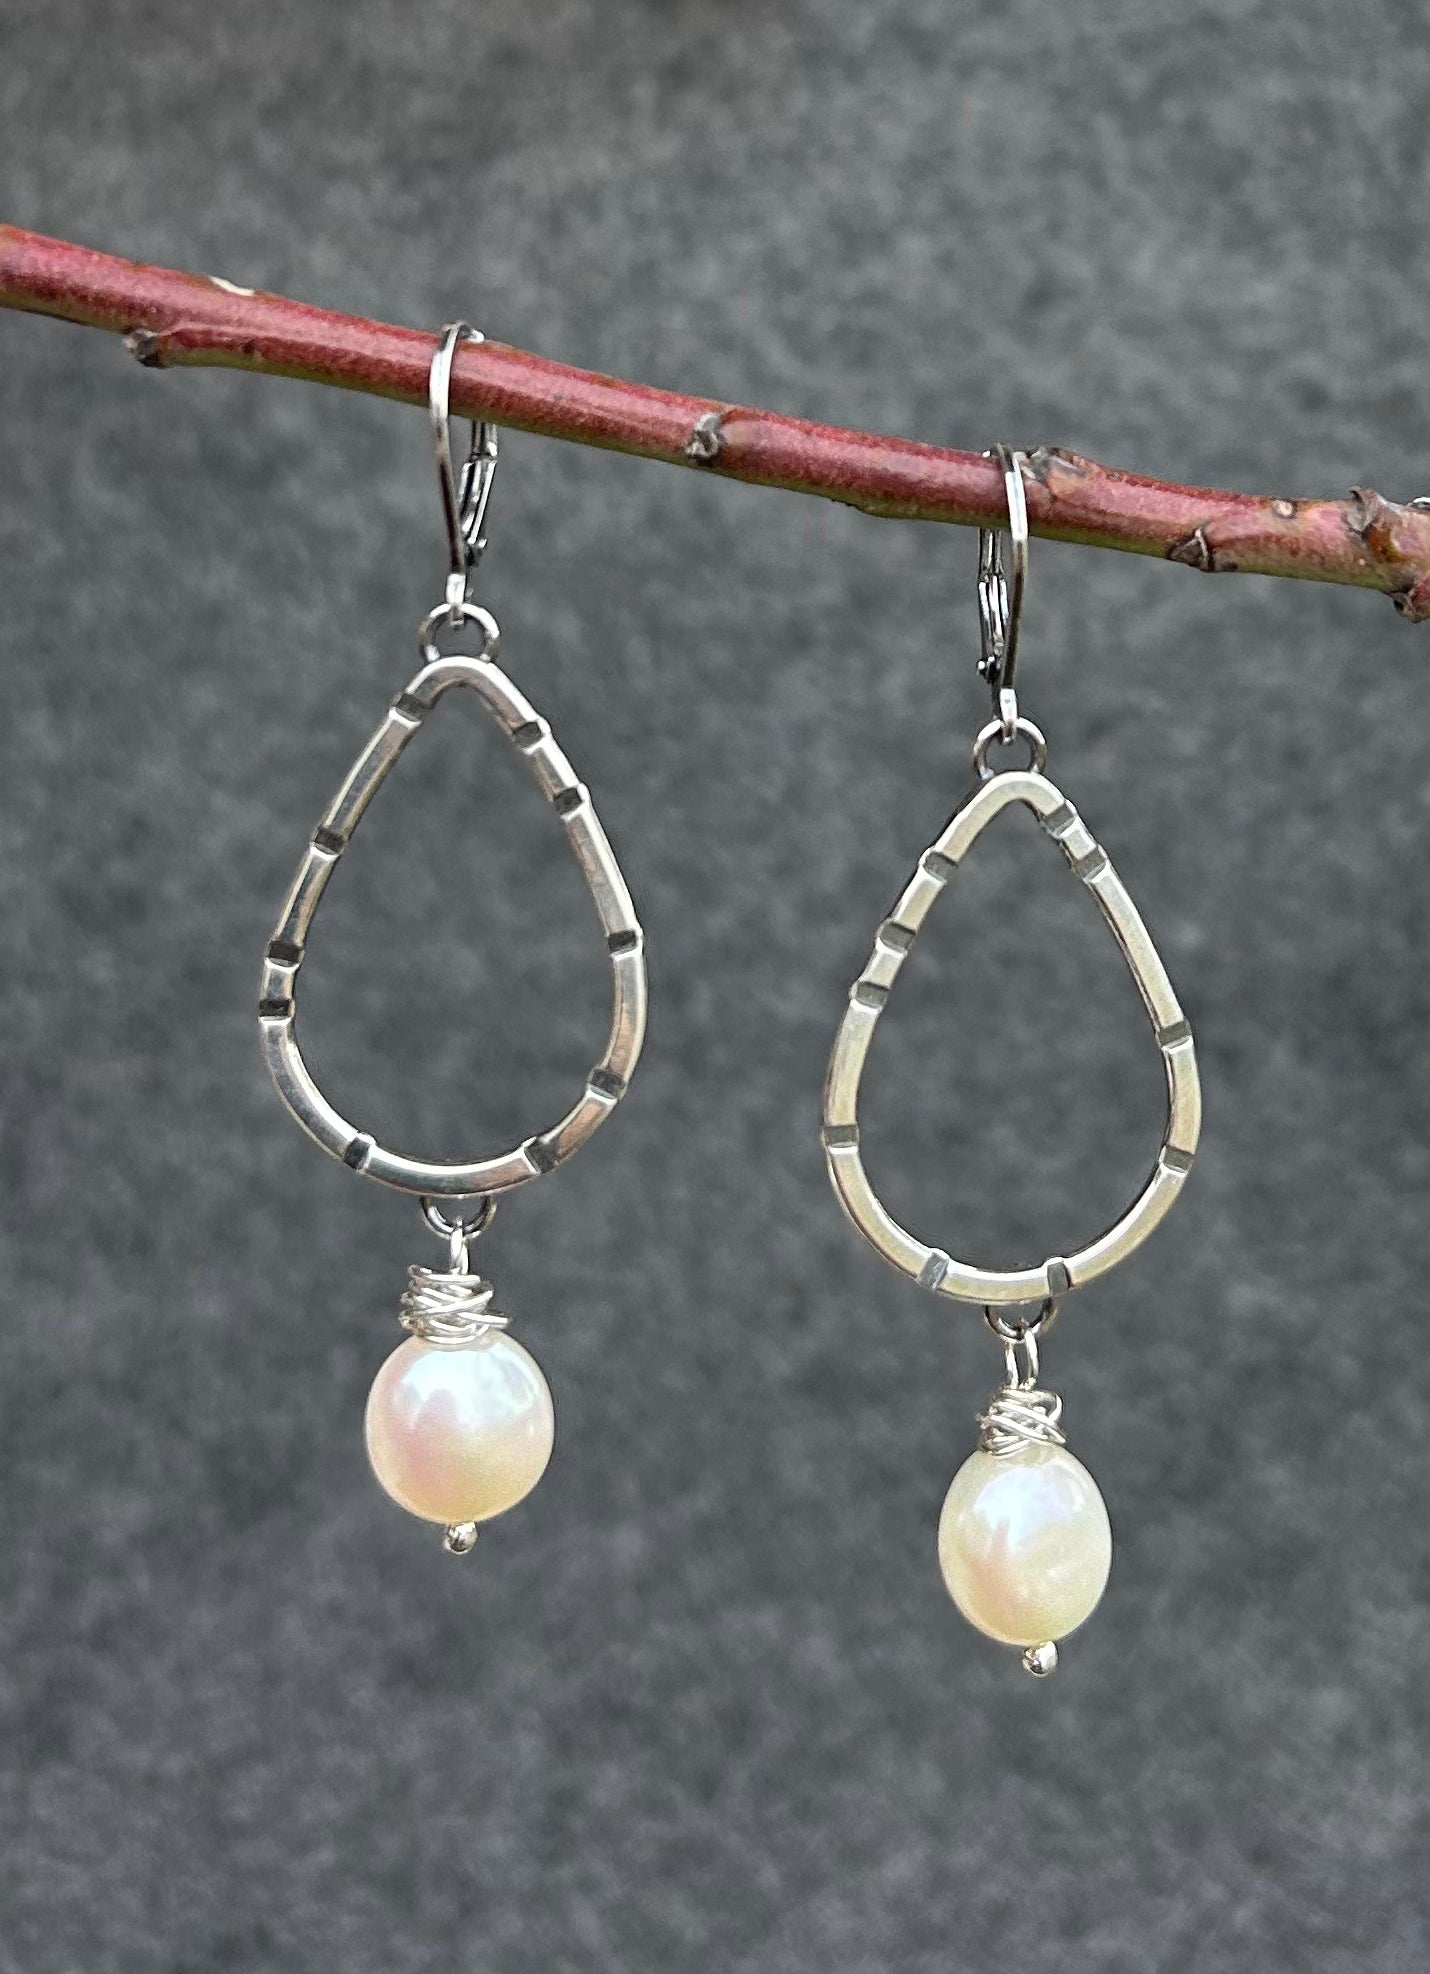 Anvil Hoop Earrings with Stamped Sterling Silver and Freshwater Pearls